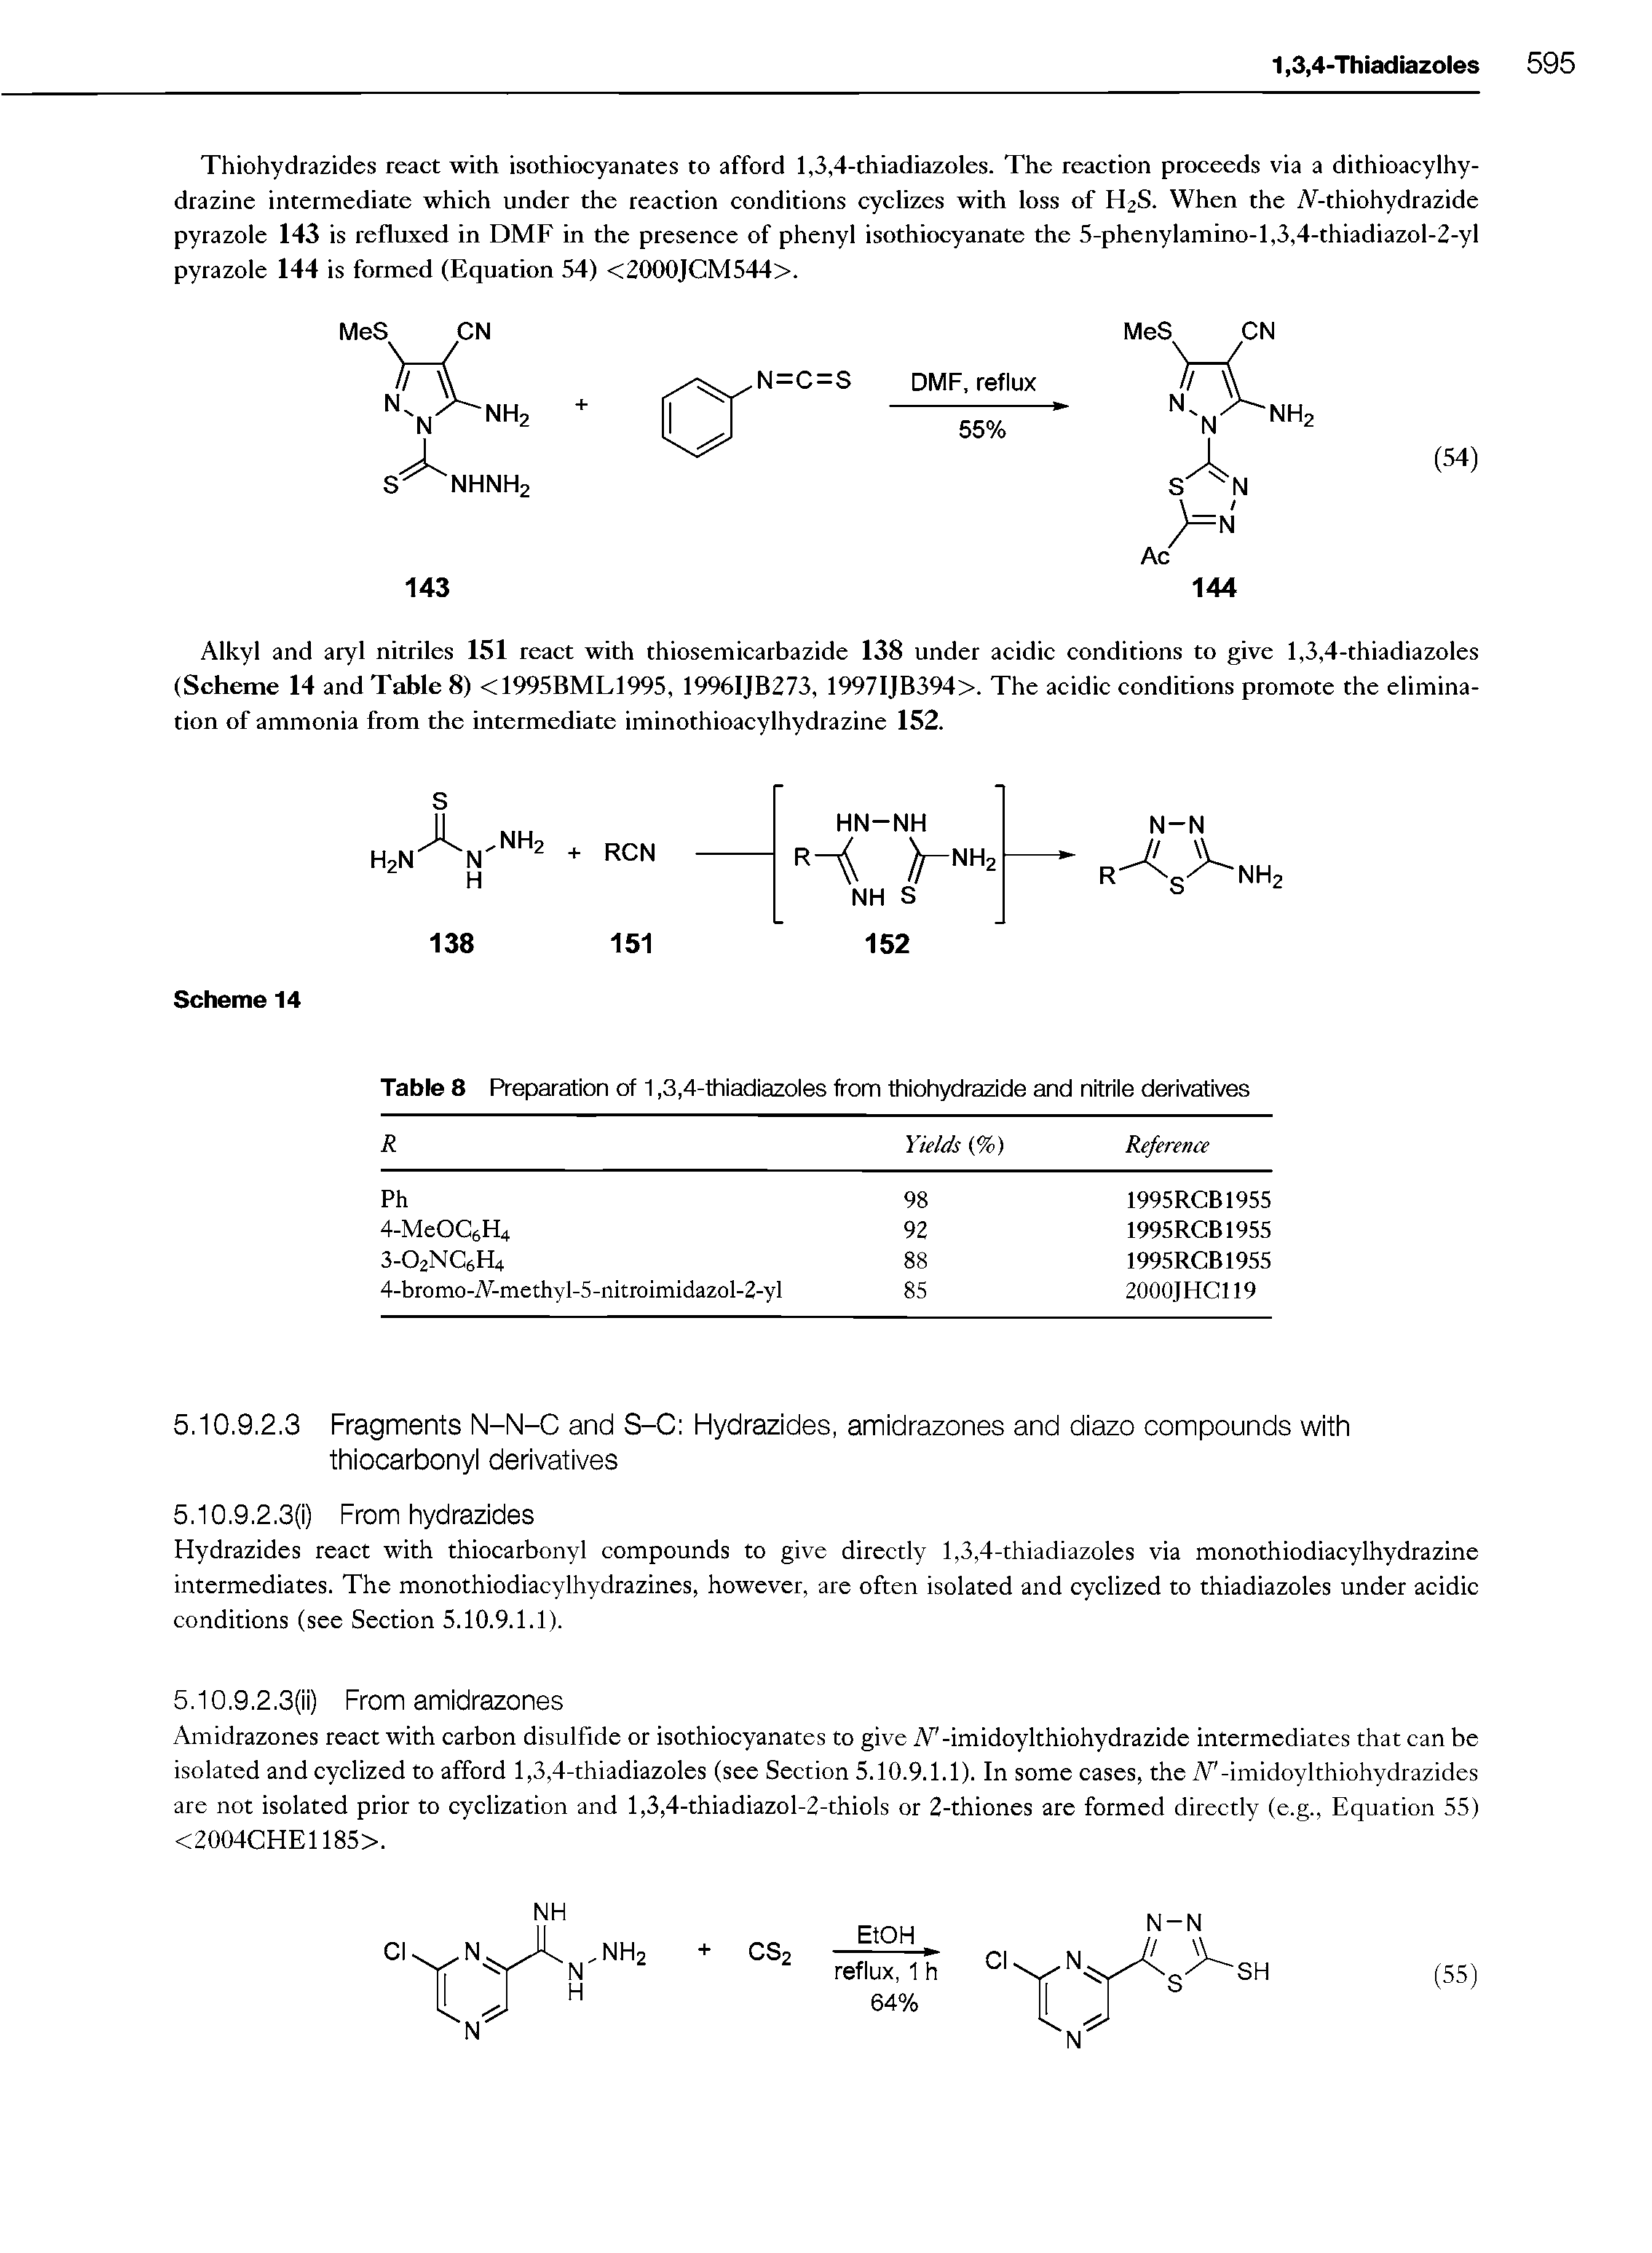 Table 8 Preparation of 1,3,4-thiadiazoles from thiohydrazide and nitrile derivatives...